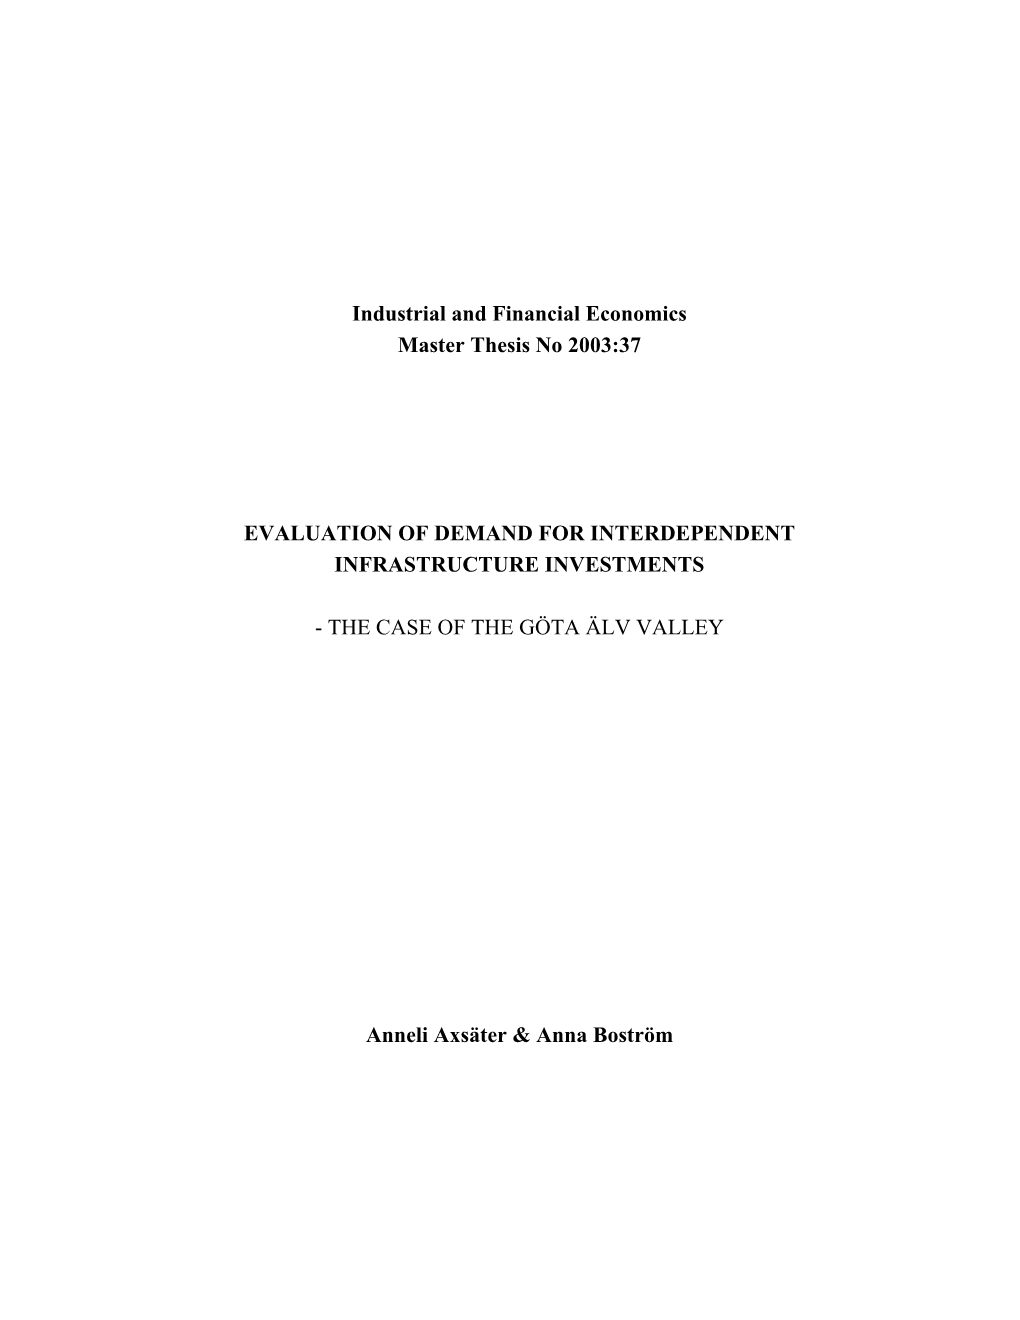 Industrial and Financial Economics Master Thesis No 2003:37